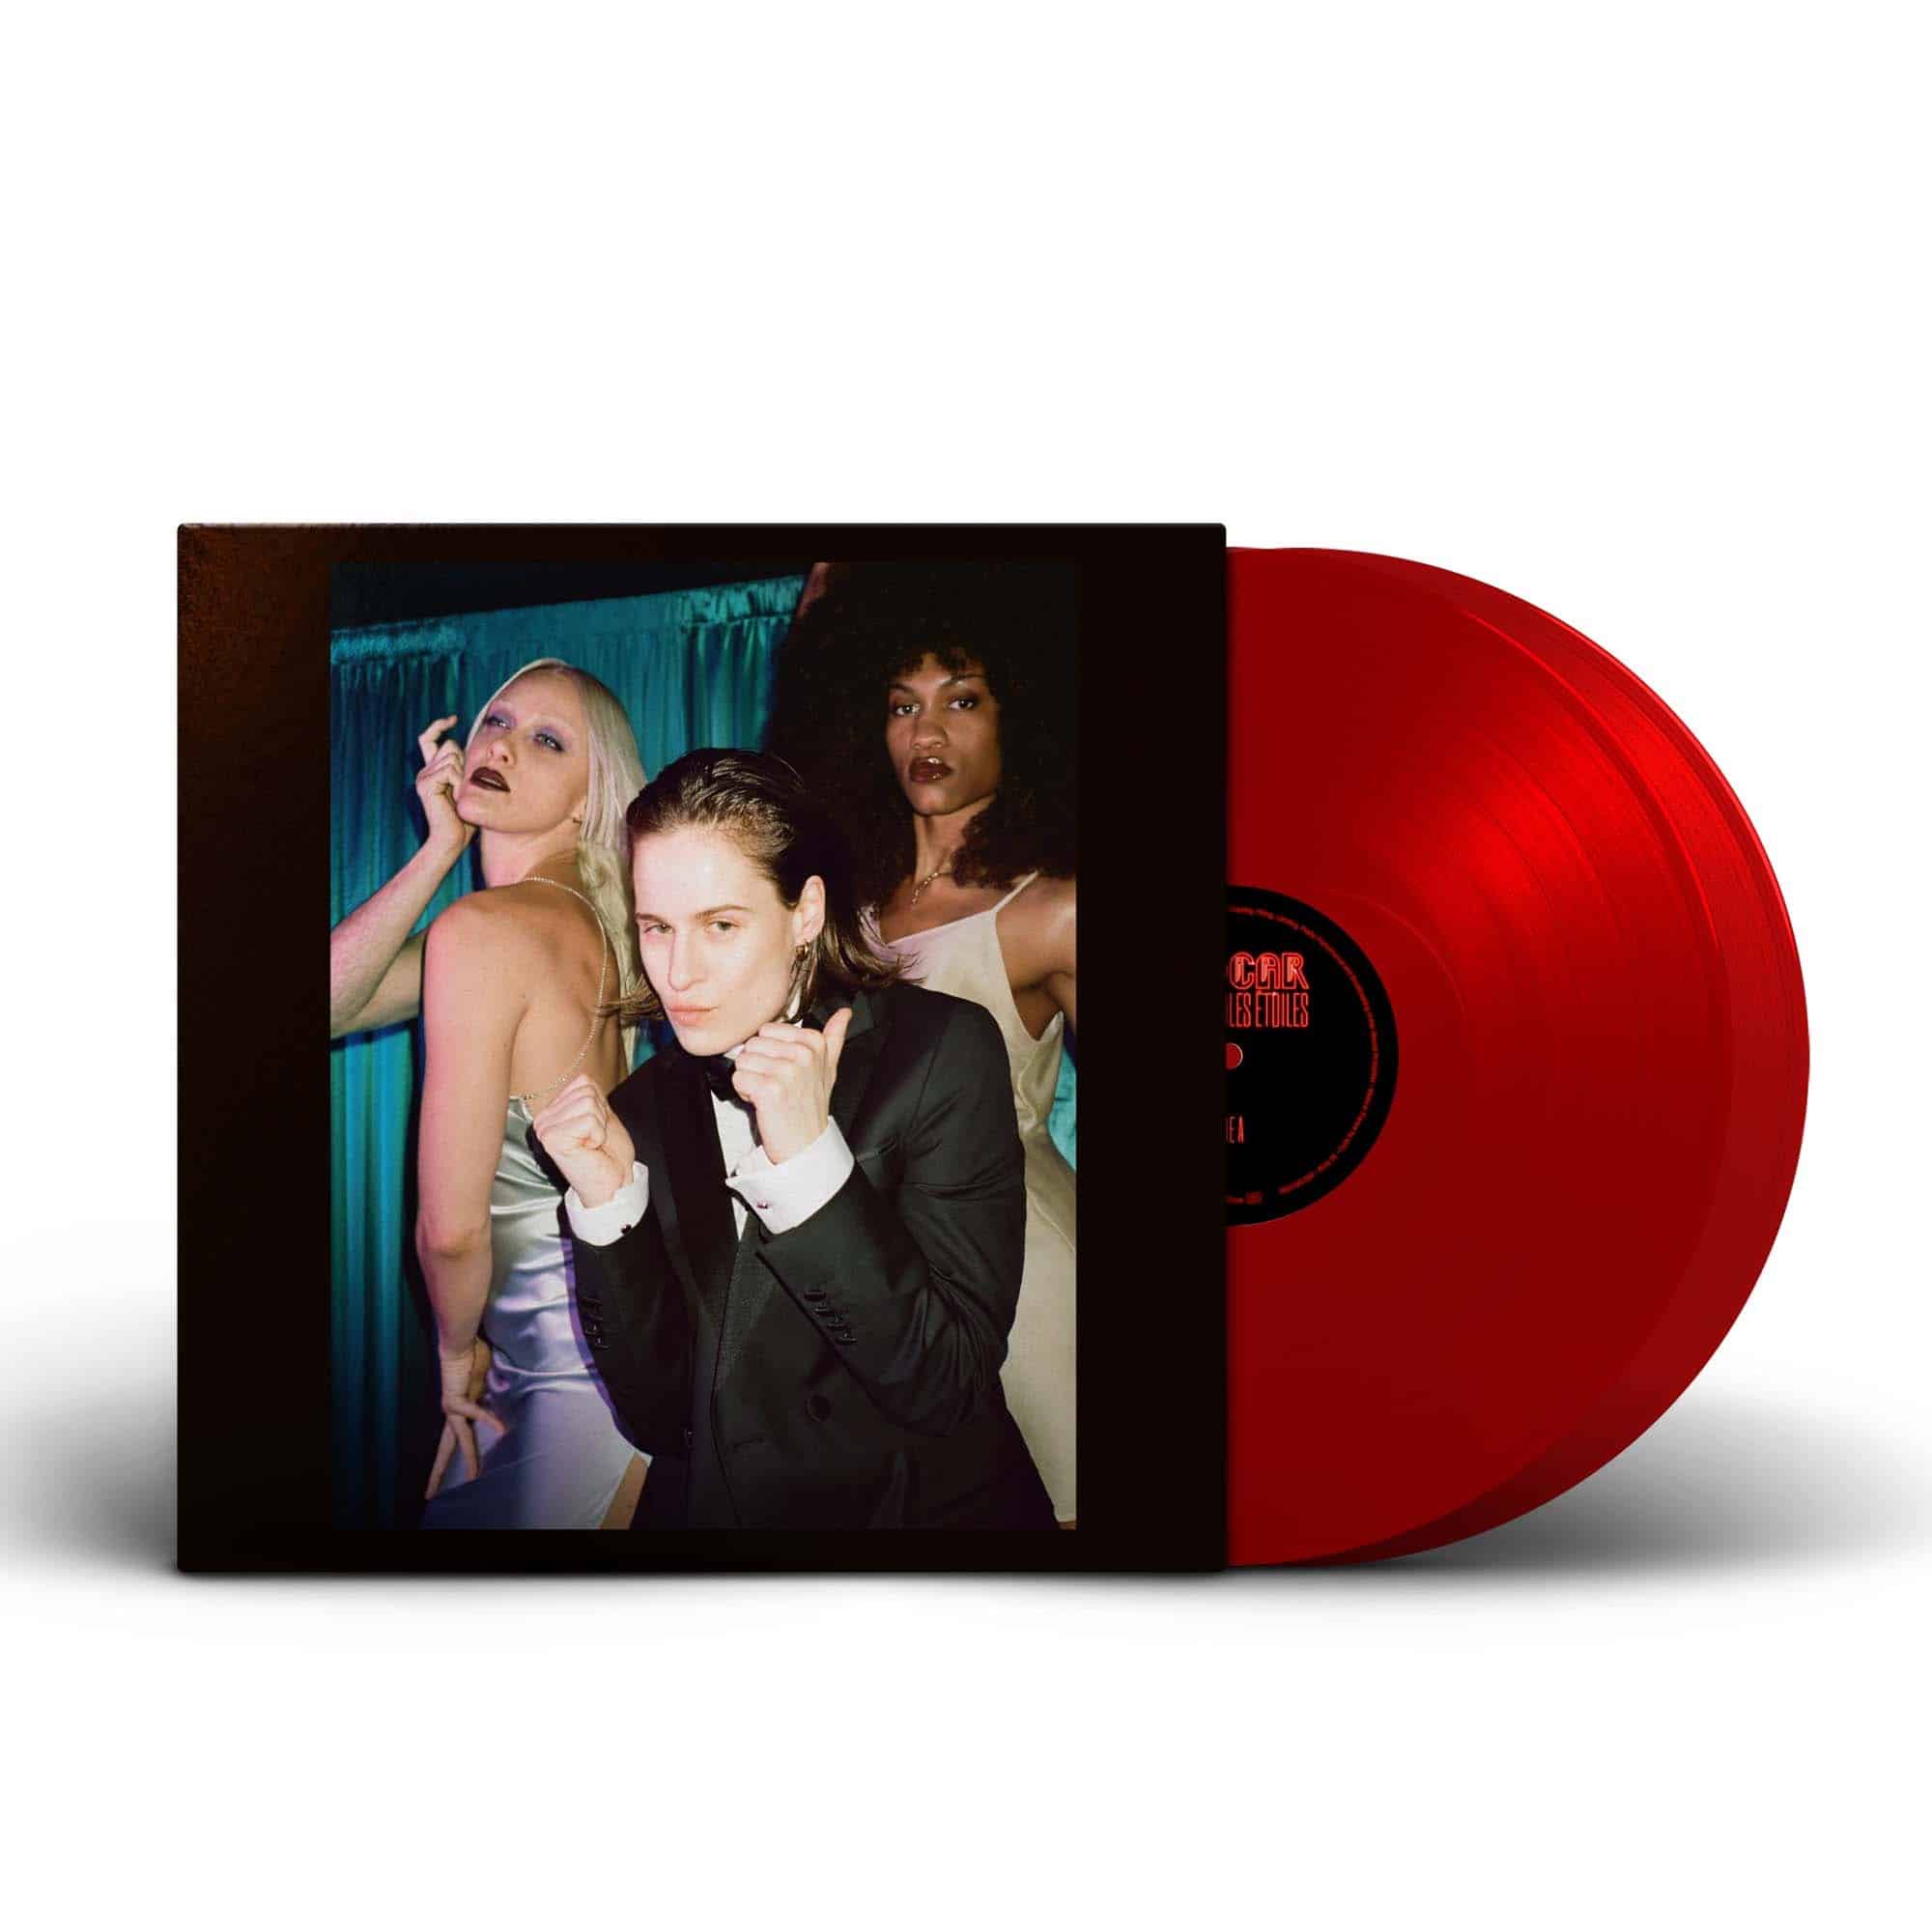 Christine-and-the-Queens-Redcar-les-adorables-toiles-Transparent-Red-LP-Productshot.jpg